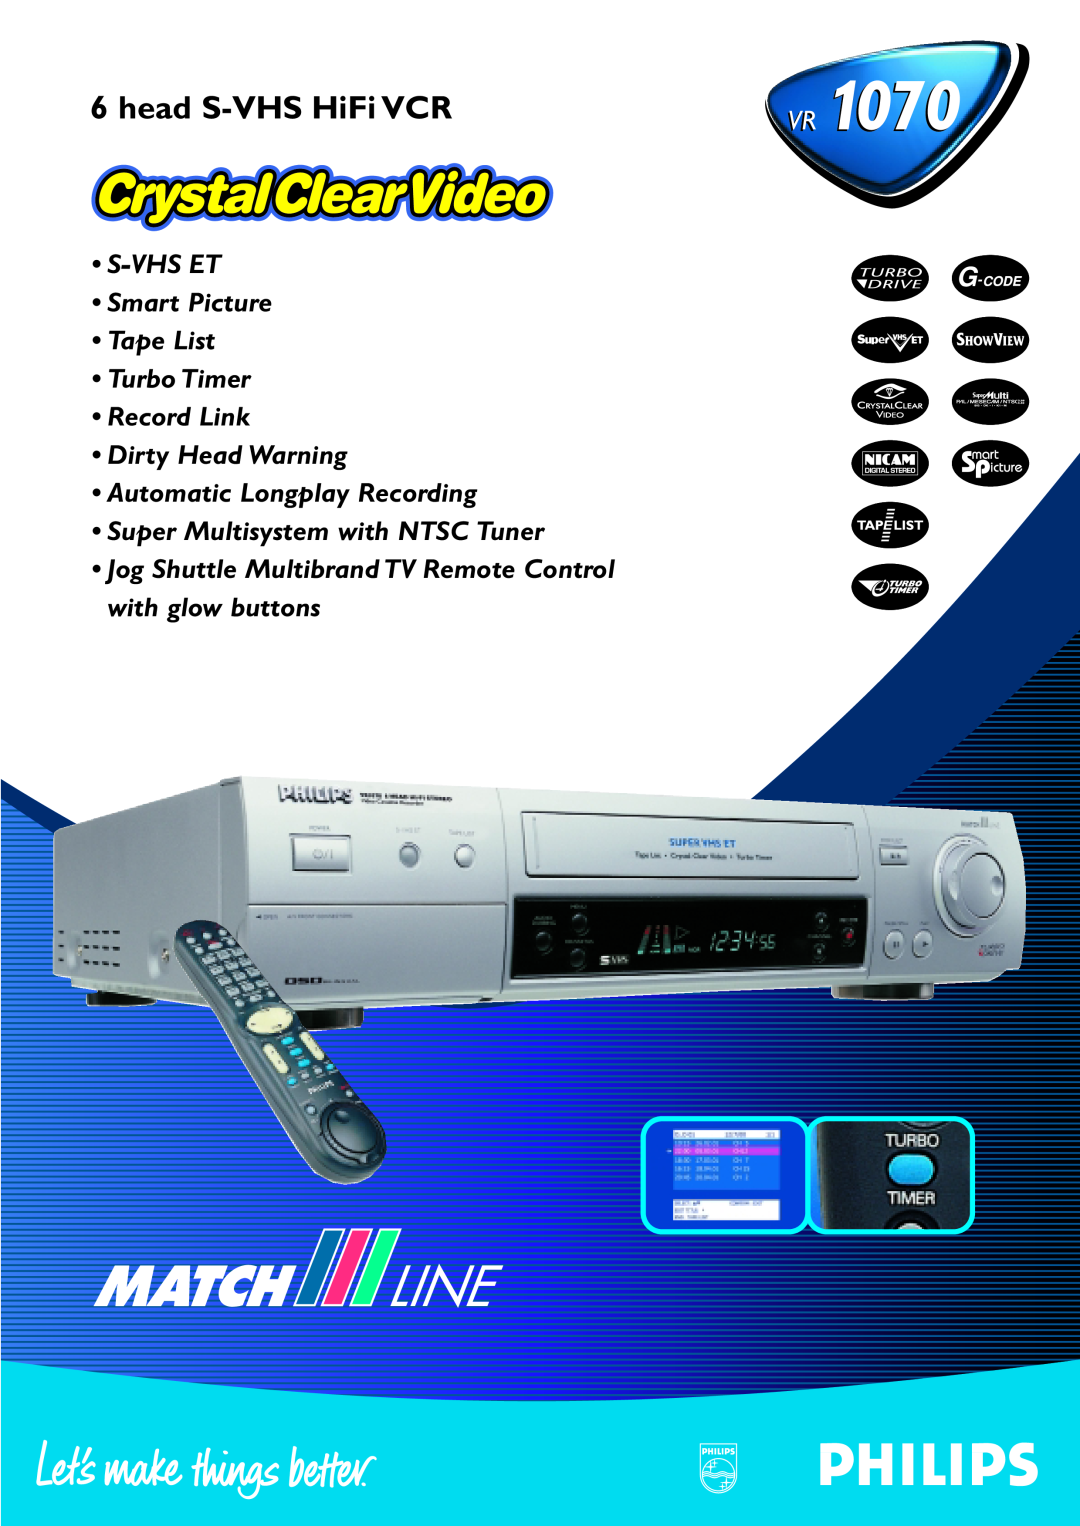 Philips VR 1070 manual head S-VHS HiFi VCR, S-VHS ET Smart Picture Tape List Turbo Timer Record Link 